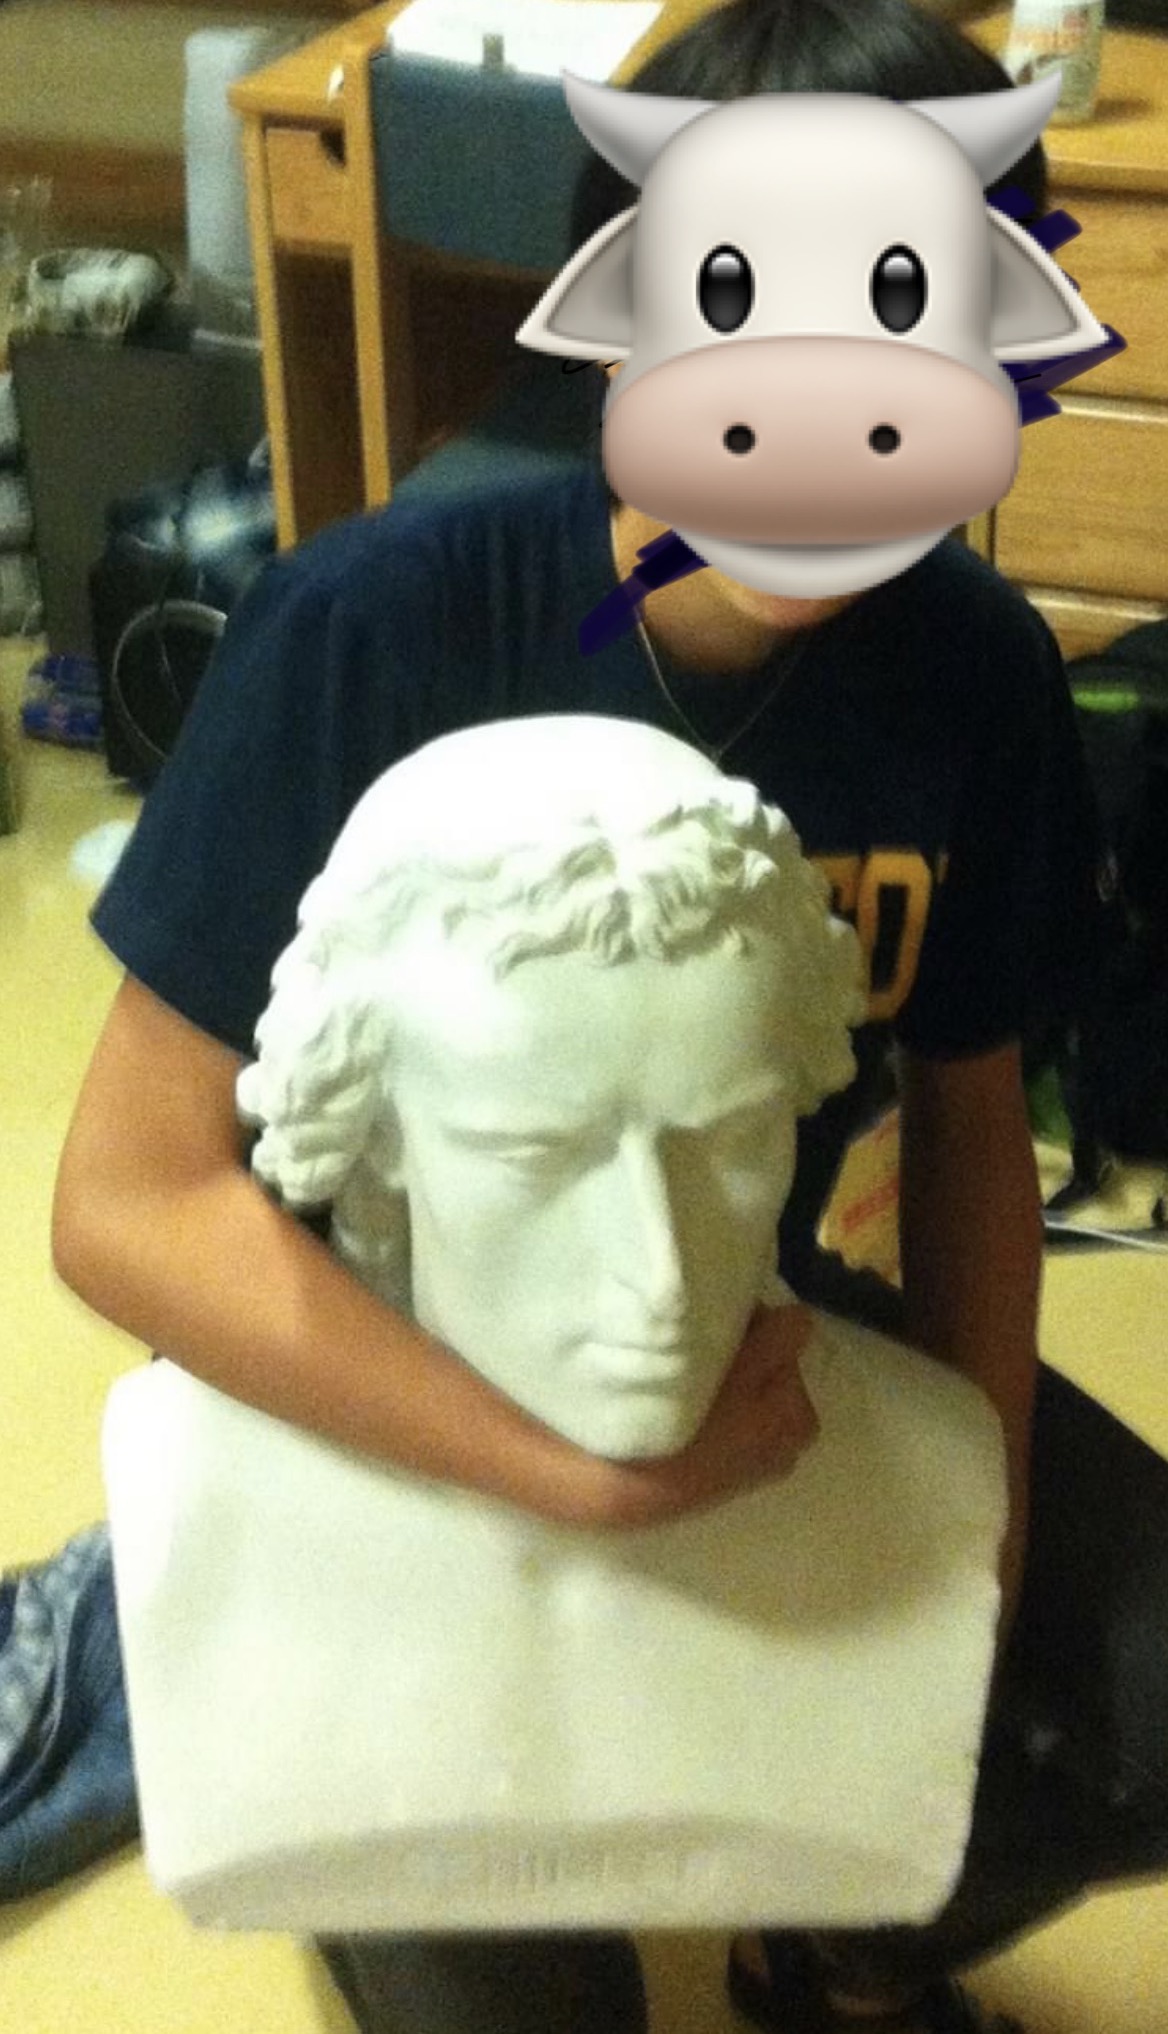 Student posing with Schiller bust